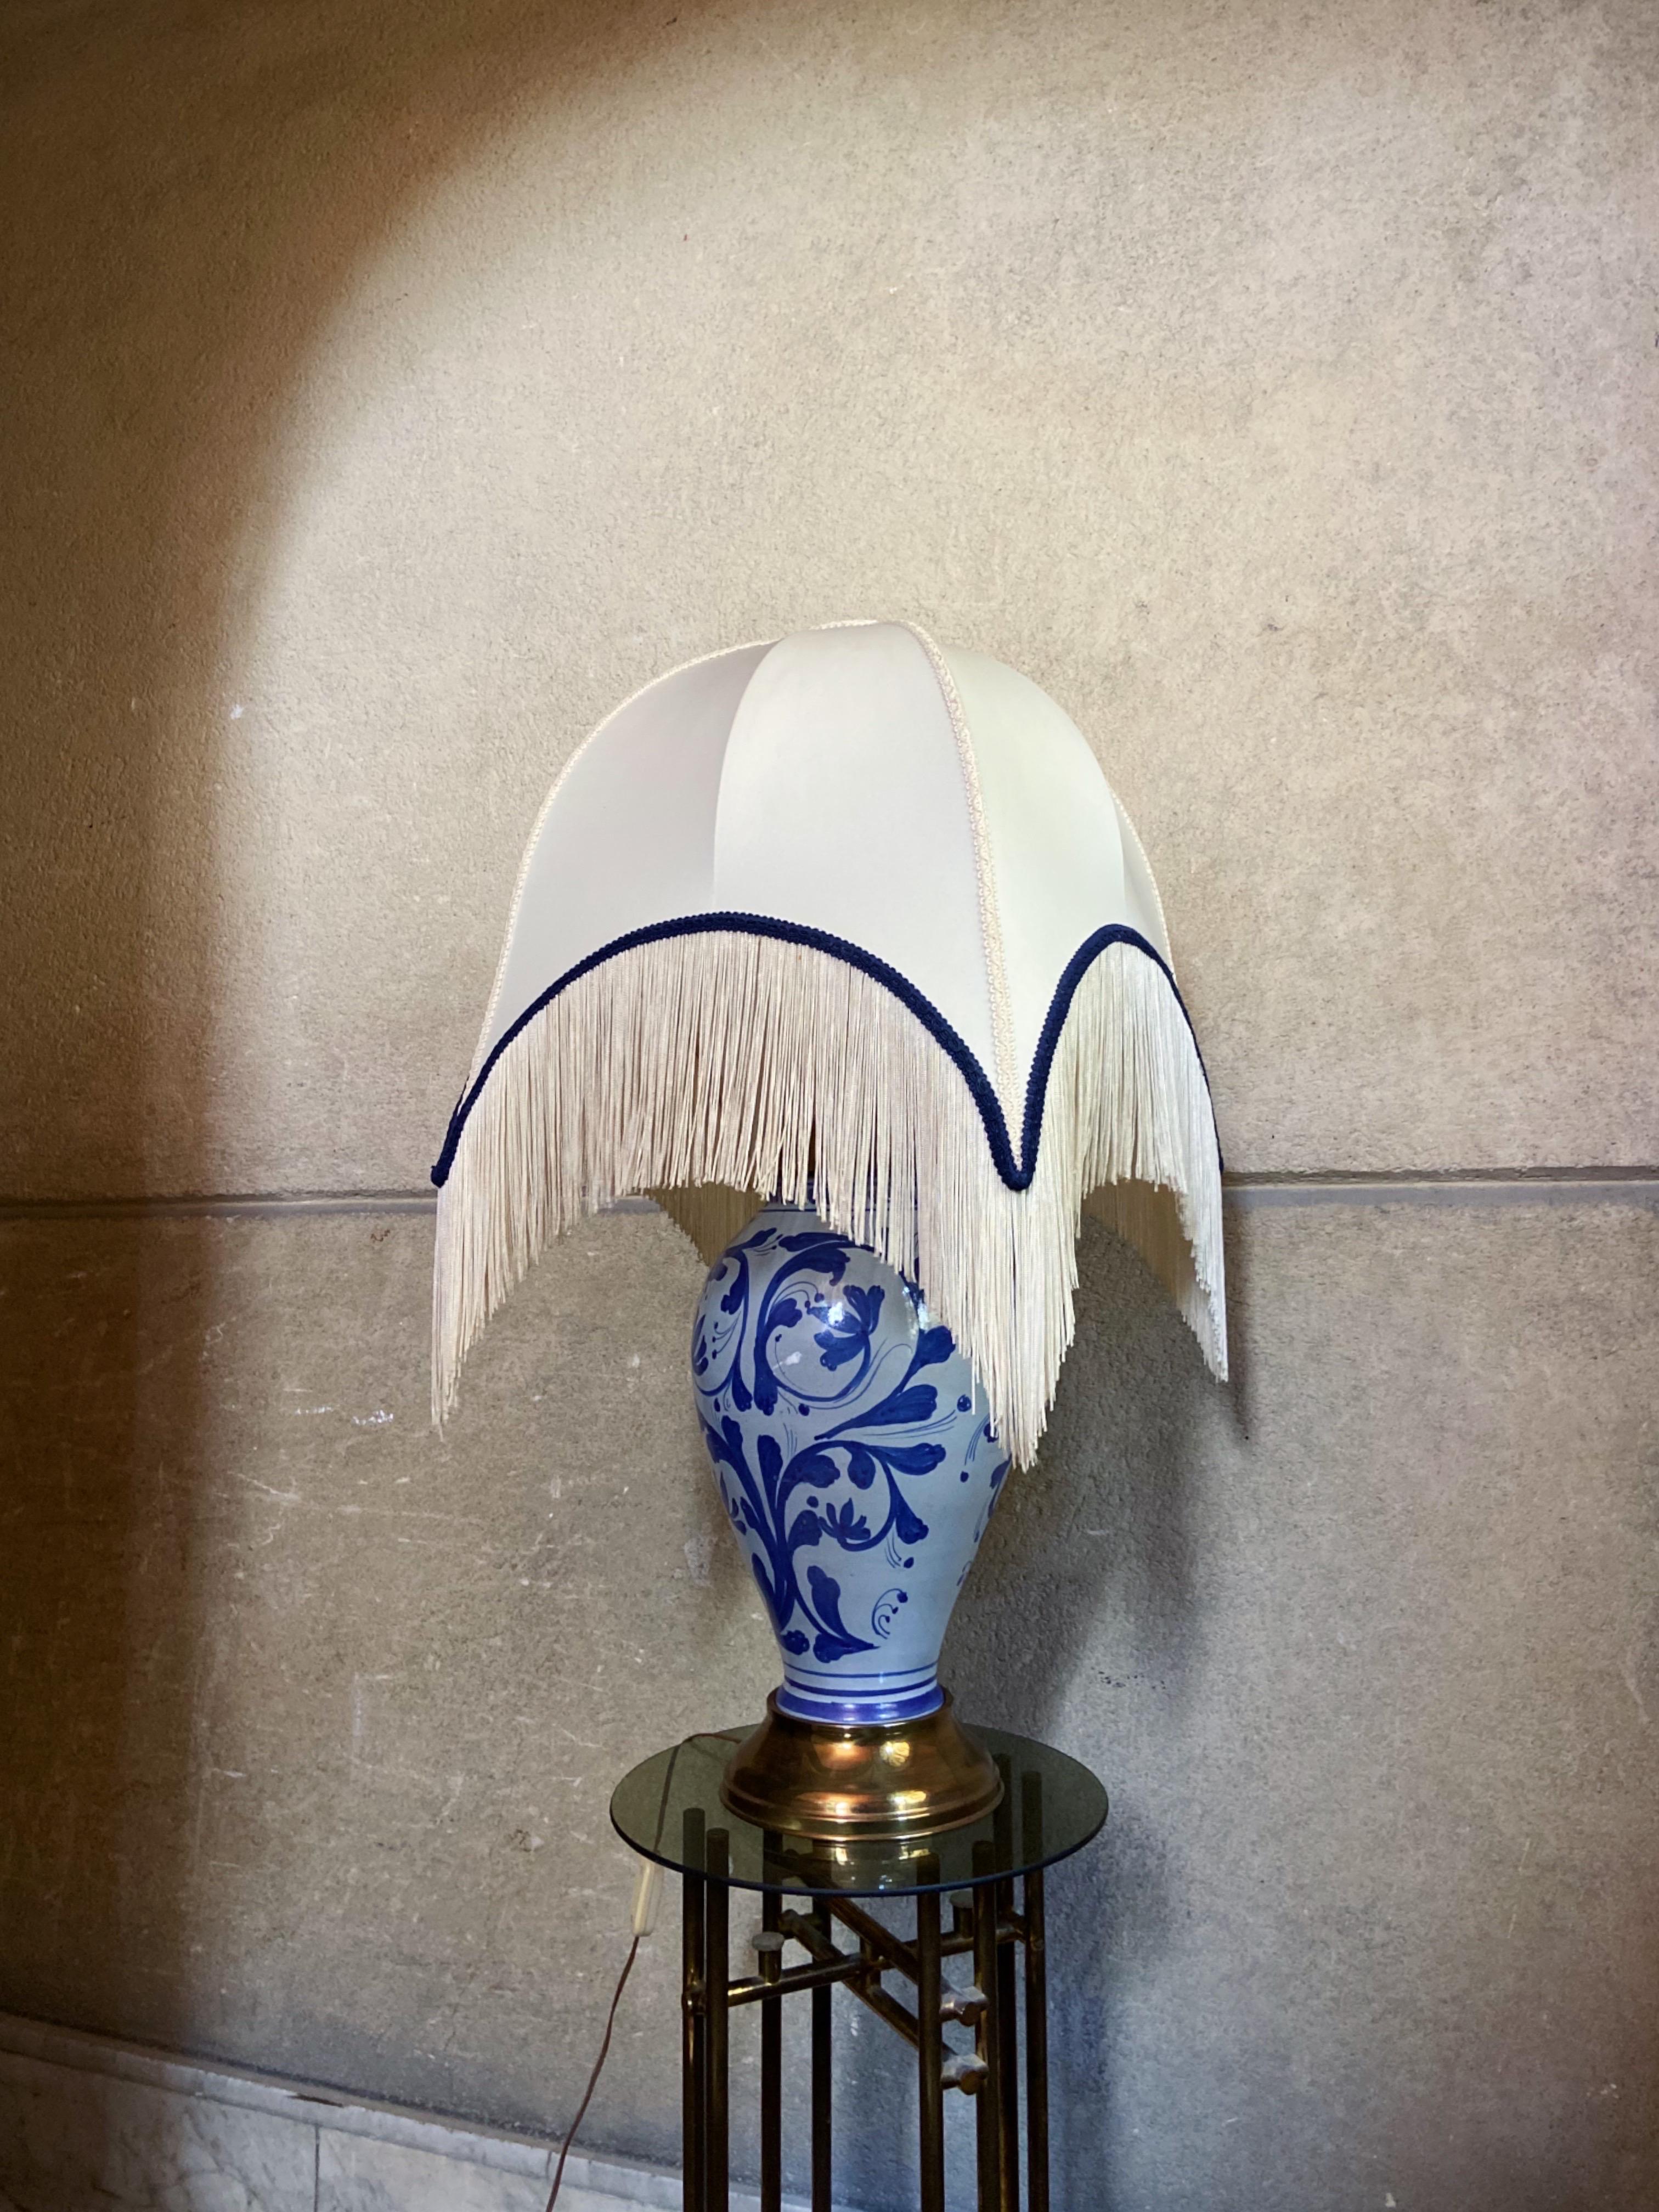 Italian ceramic table light. Sold with lamp shade.

Details
Dimensions: Light base is 55 cm. Height with shade 78 cm.
Materials and Ceramic, brass, fabric.
Place of Origin: Italy
Period 1970-1979
Condition: In good vintage condition. The